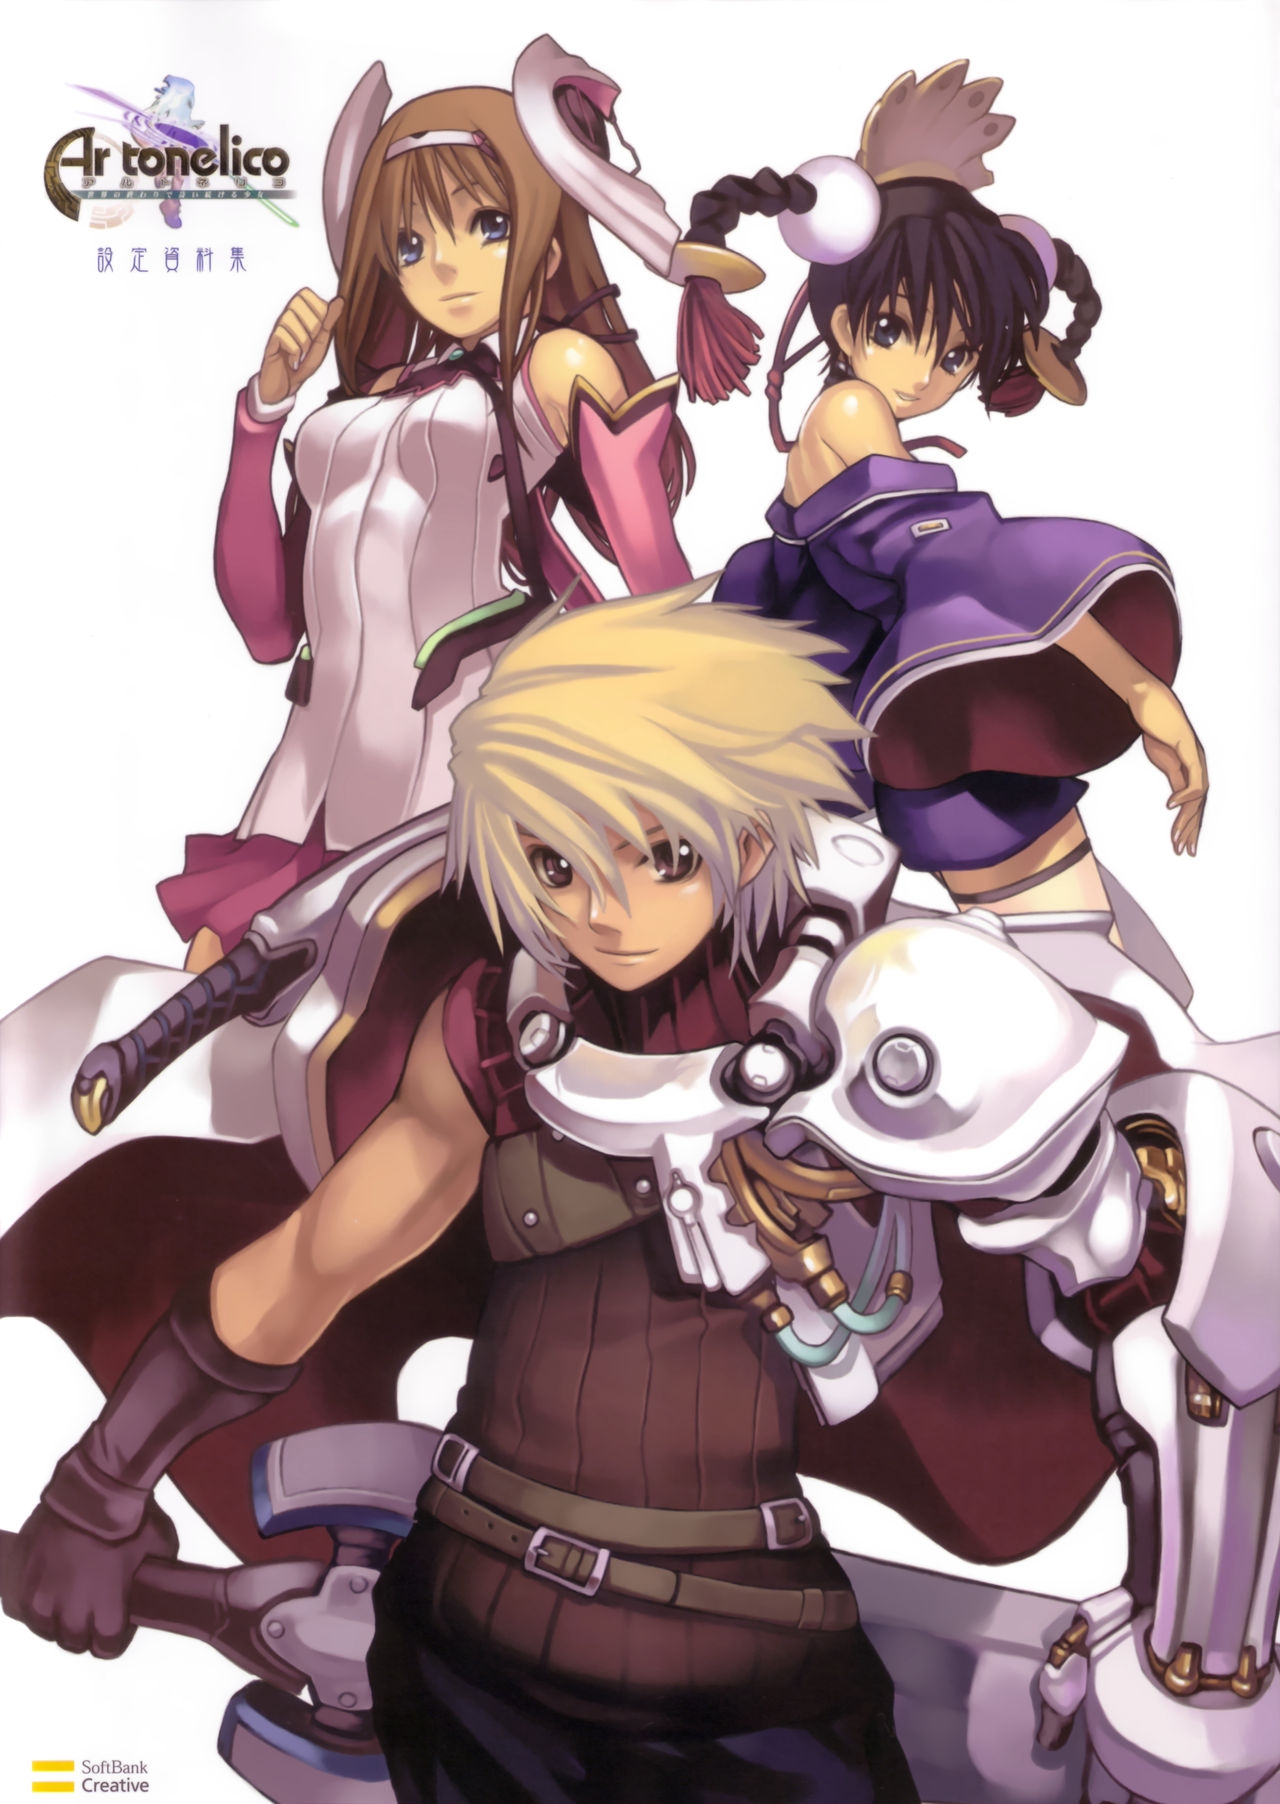 The Ar tonelico Official Setting Materials Collection Book 0